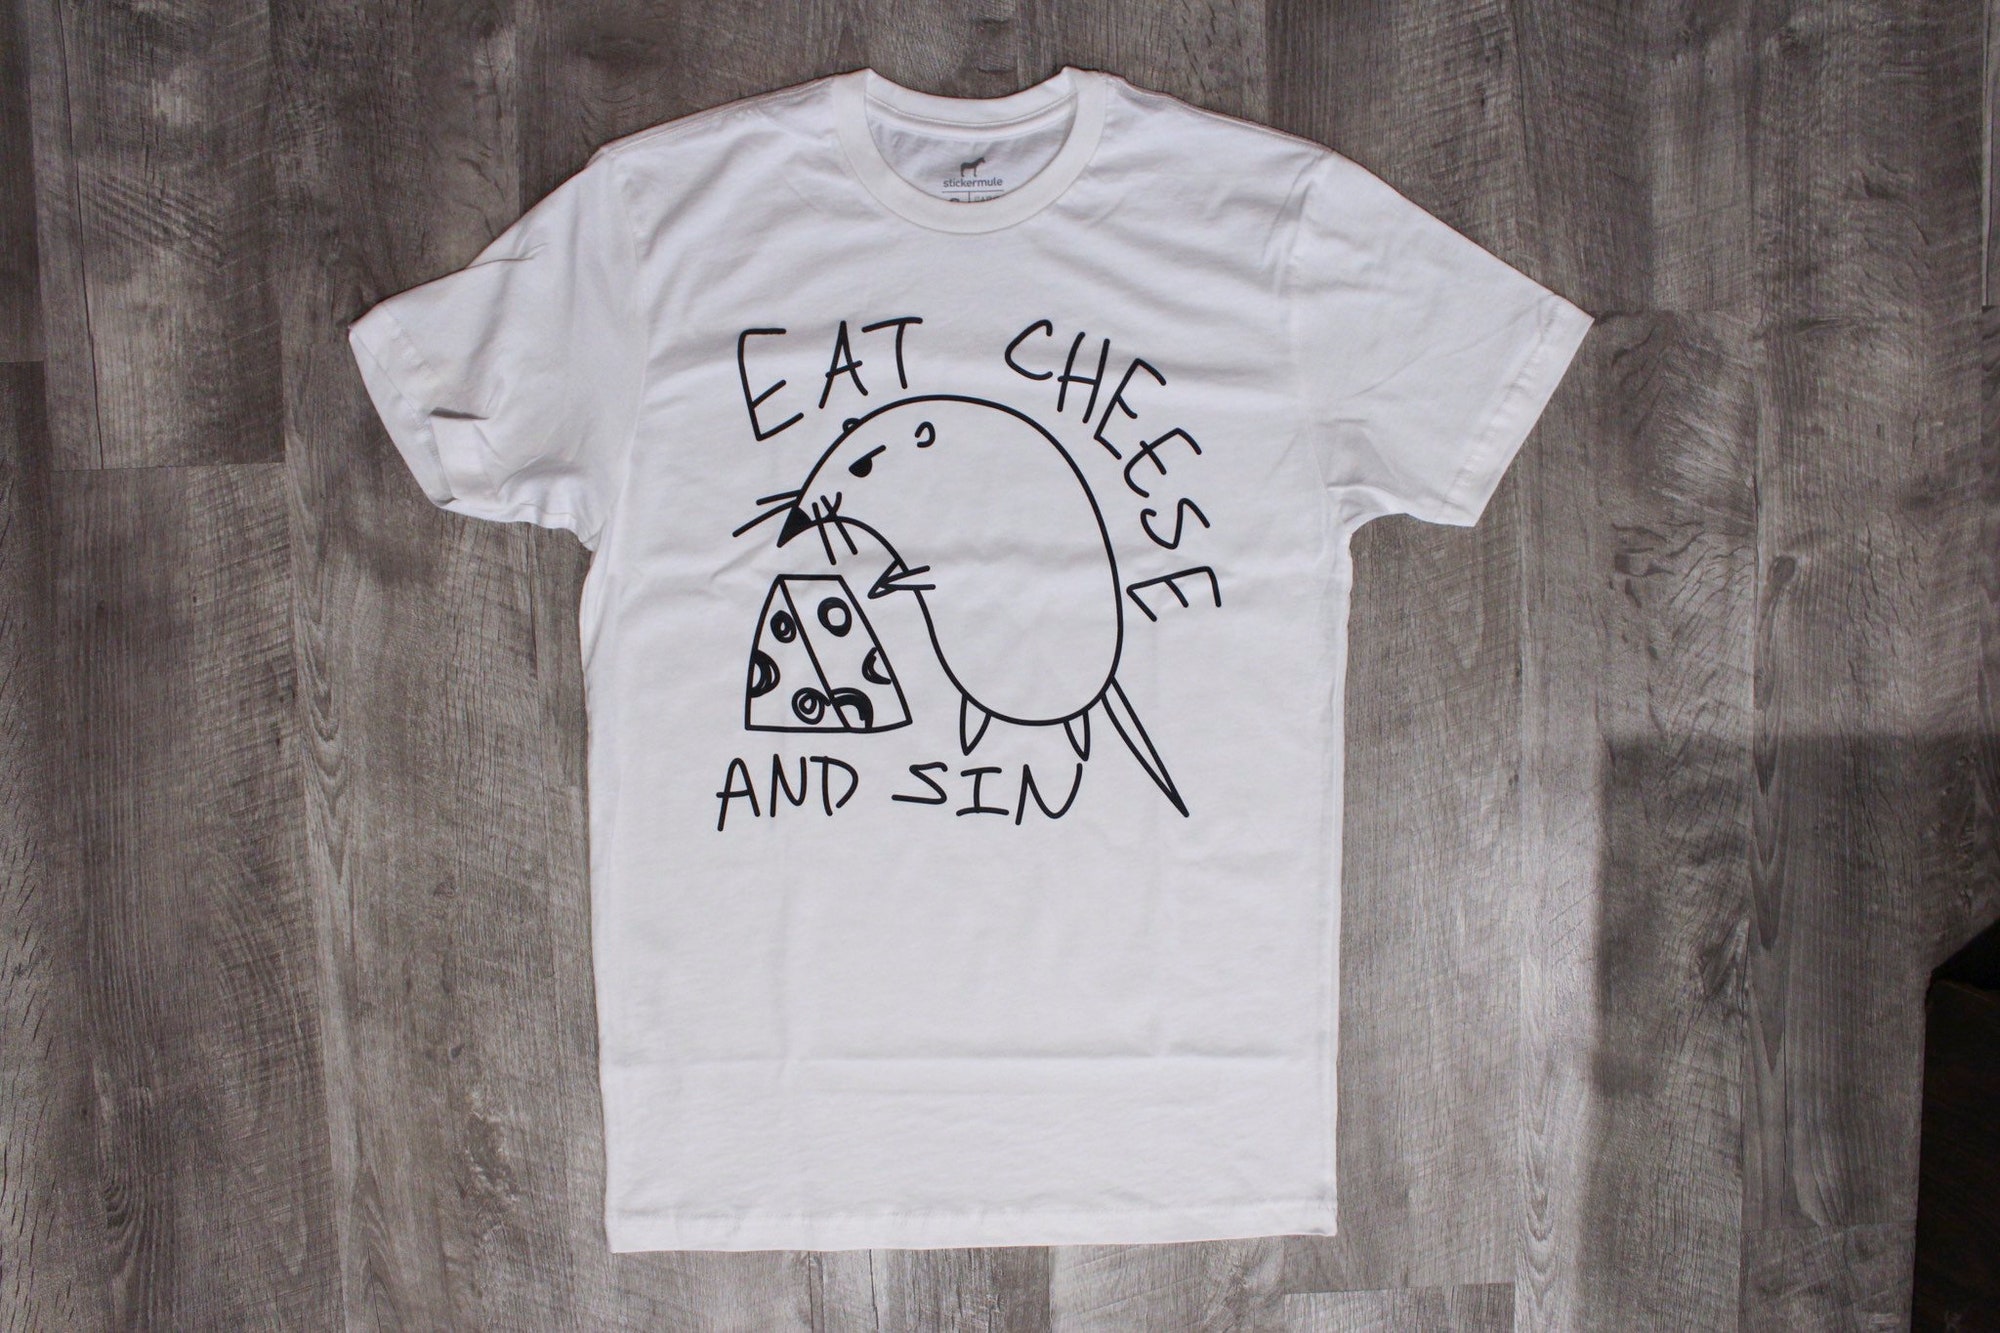 Eat cheese and sin t-shirt